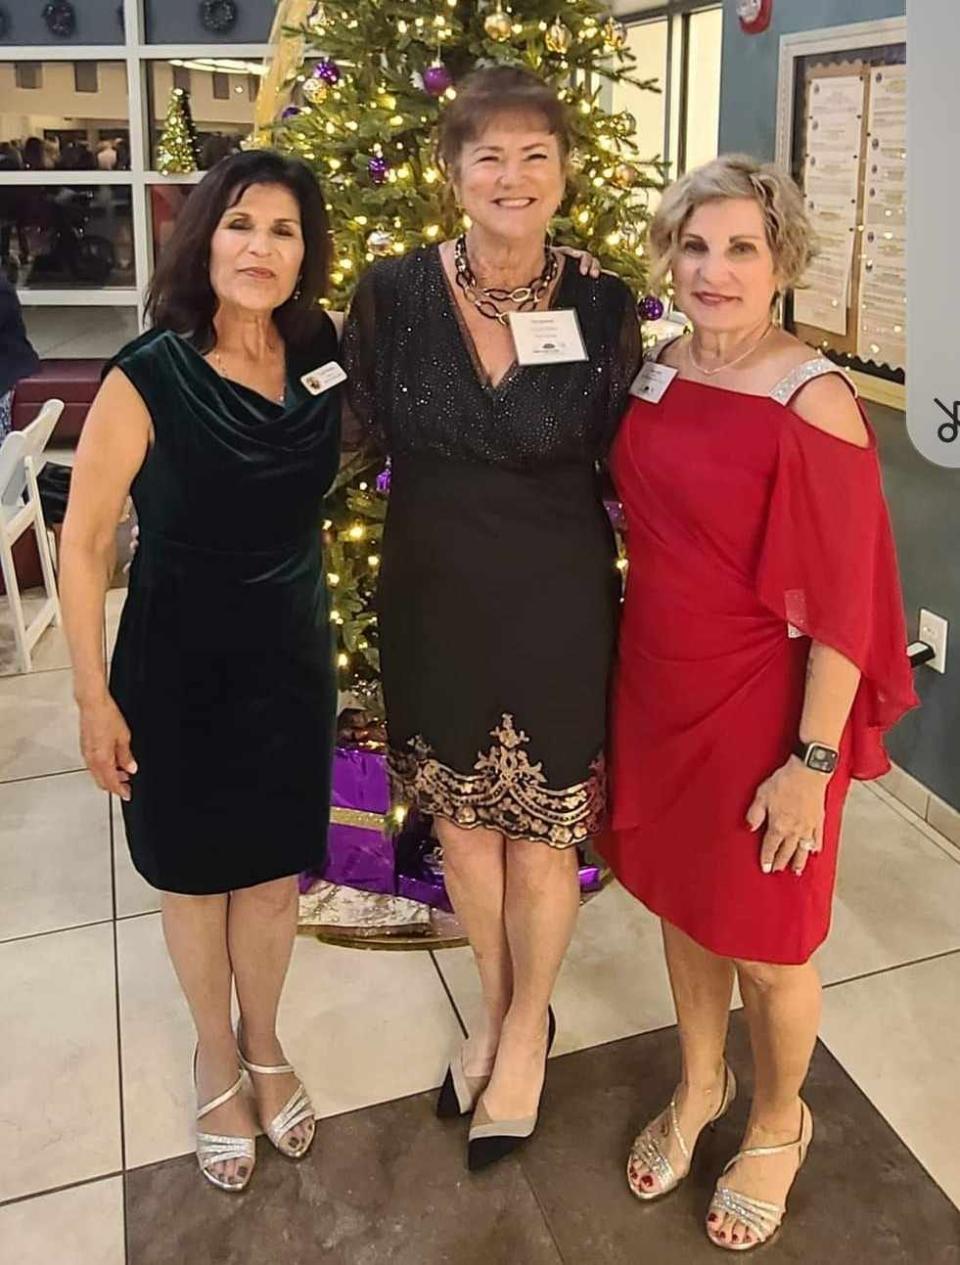 Kat Atwood, center, celebrates Christmas with mayors Lois Paritsky of Ponce Inlet, left, and Nancy Miller of Daytona Beach Shores, right. Both mayors have agreed to recognize World Encephalitis Day at Atwood's request.